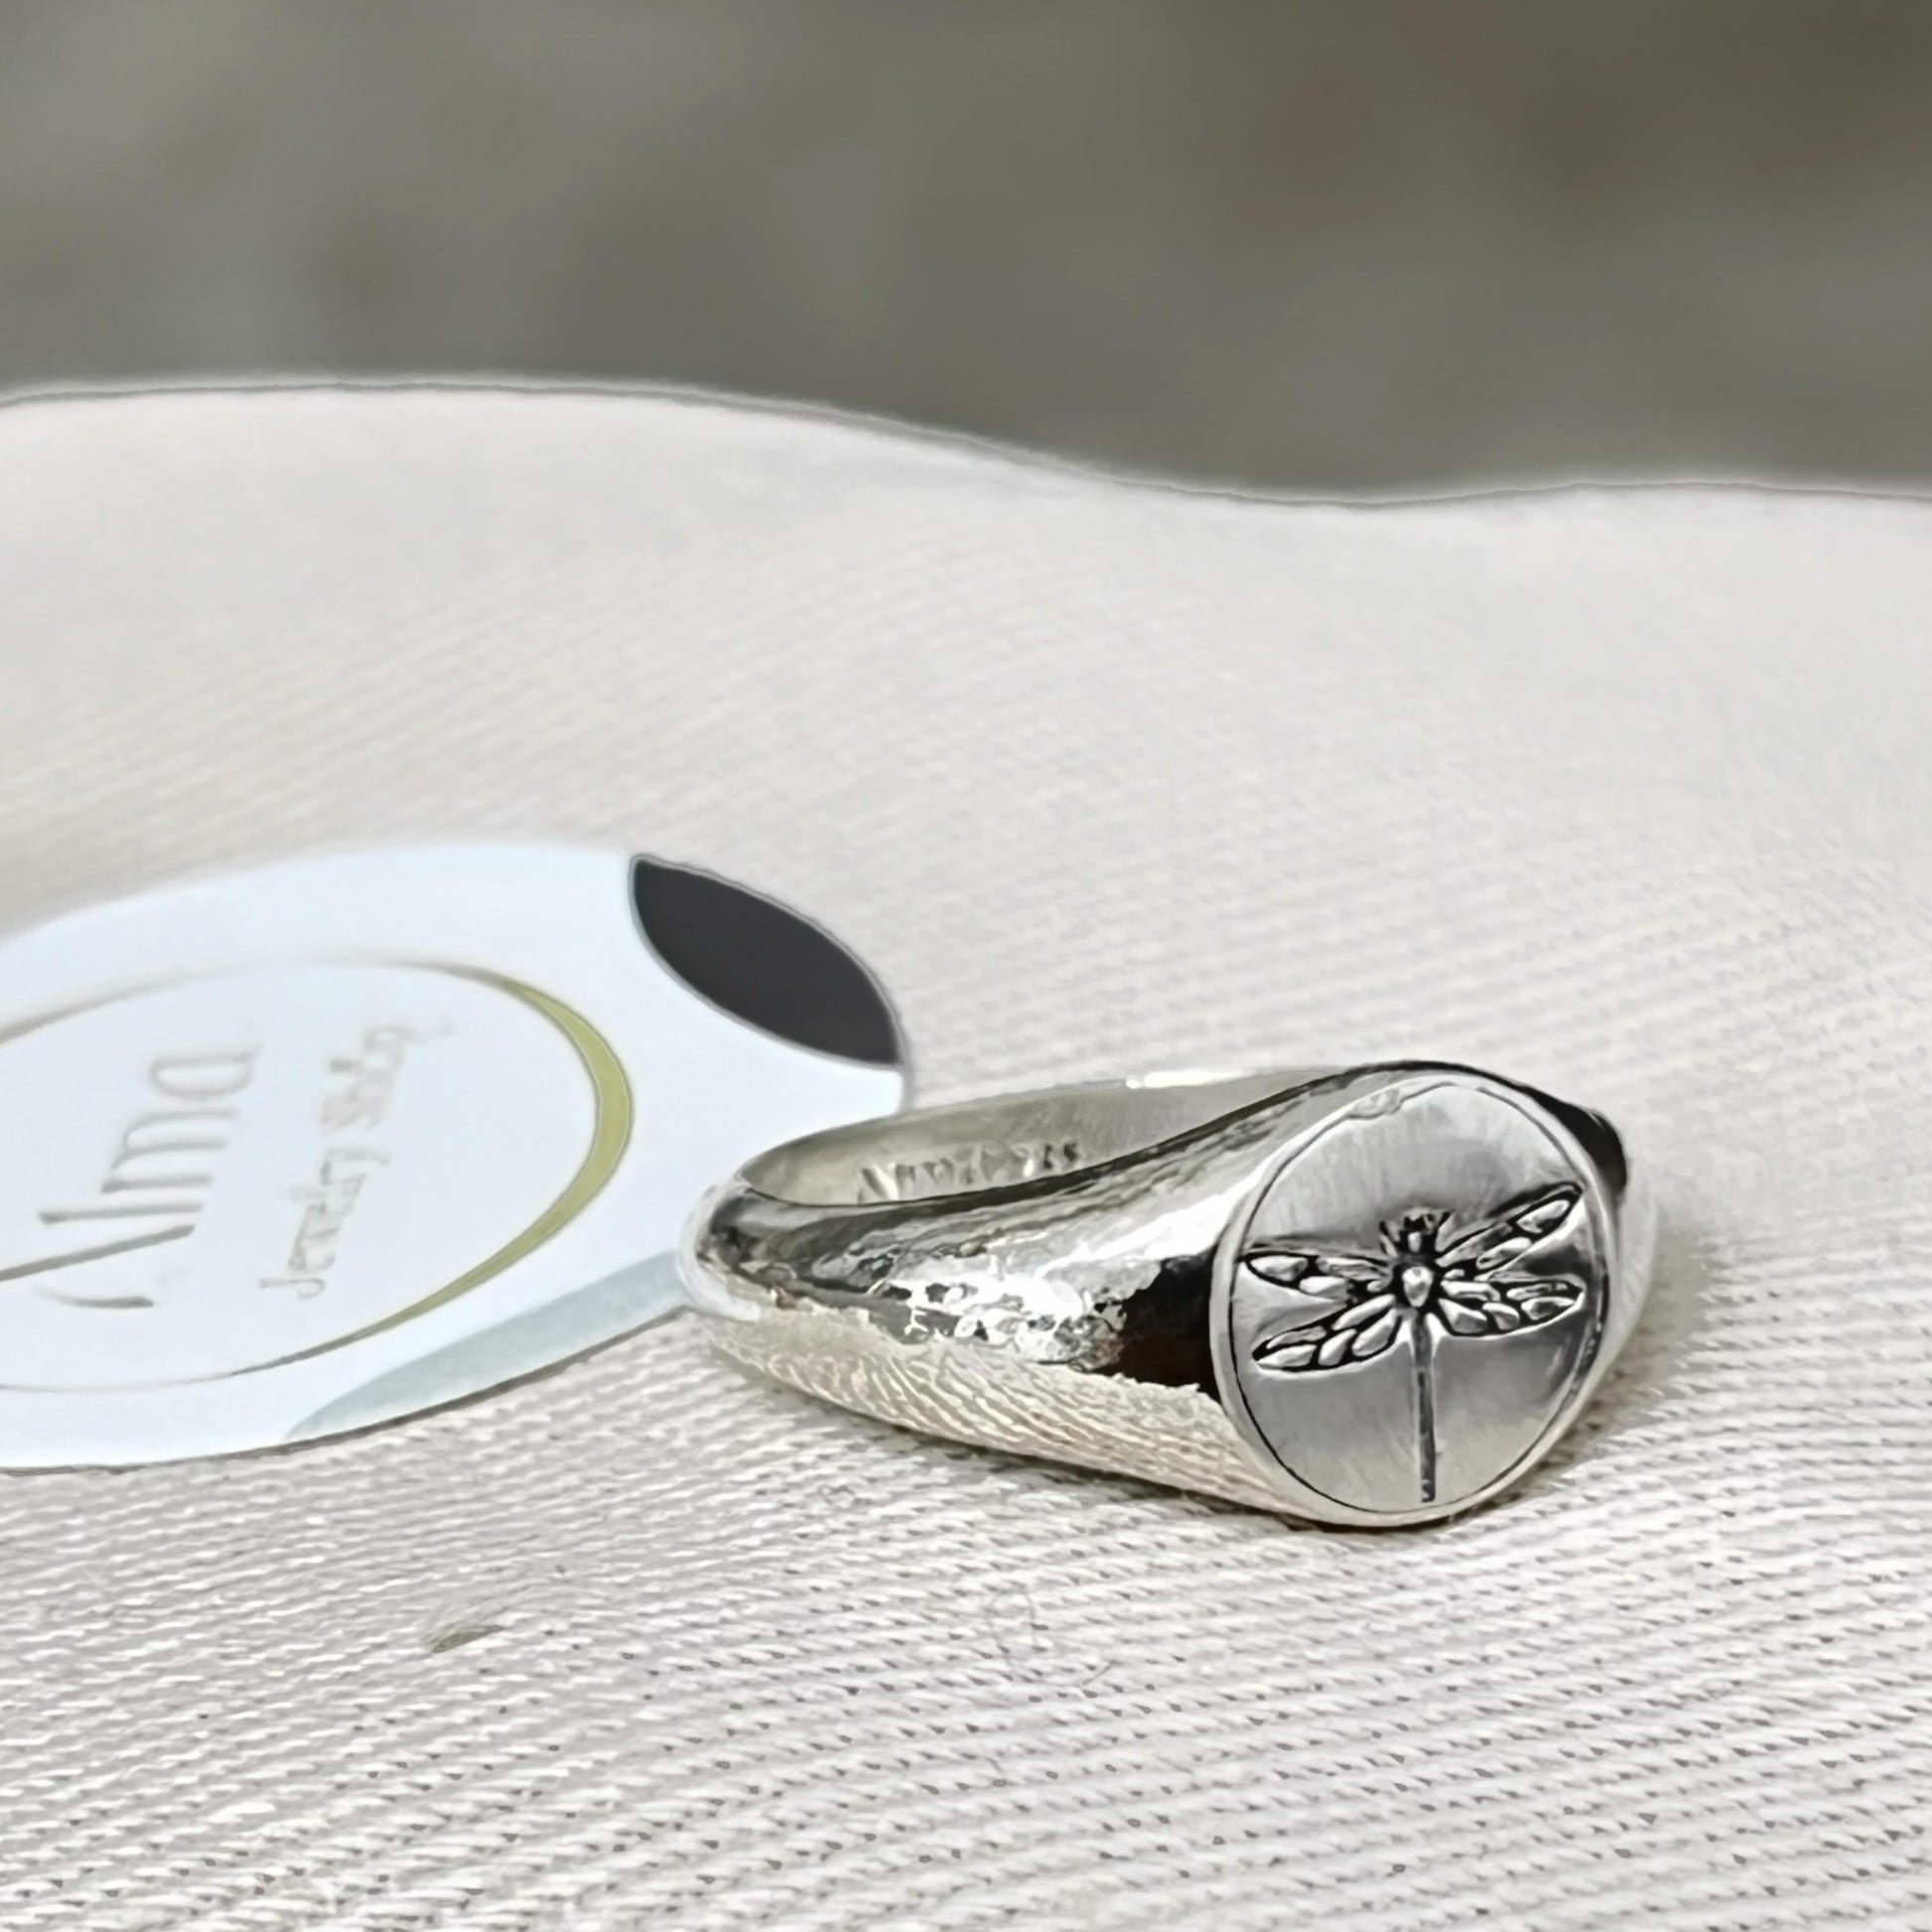 Engraved Dragonfly's Dance Signet Ring - Silver - AlmaJewelryShop